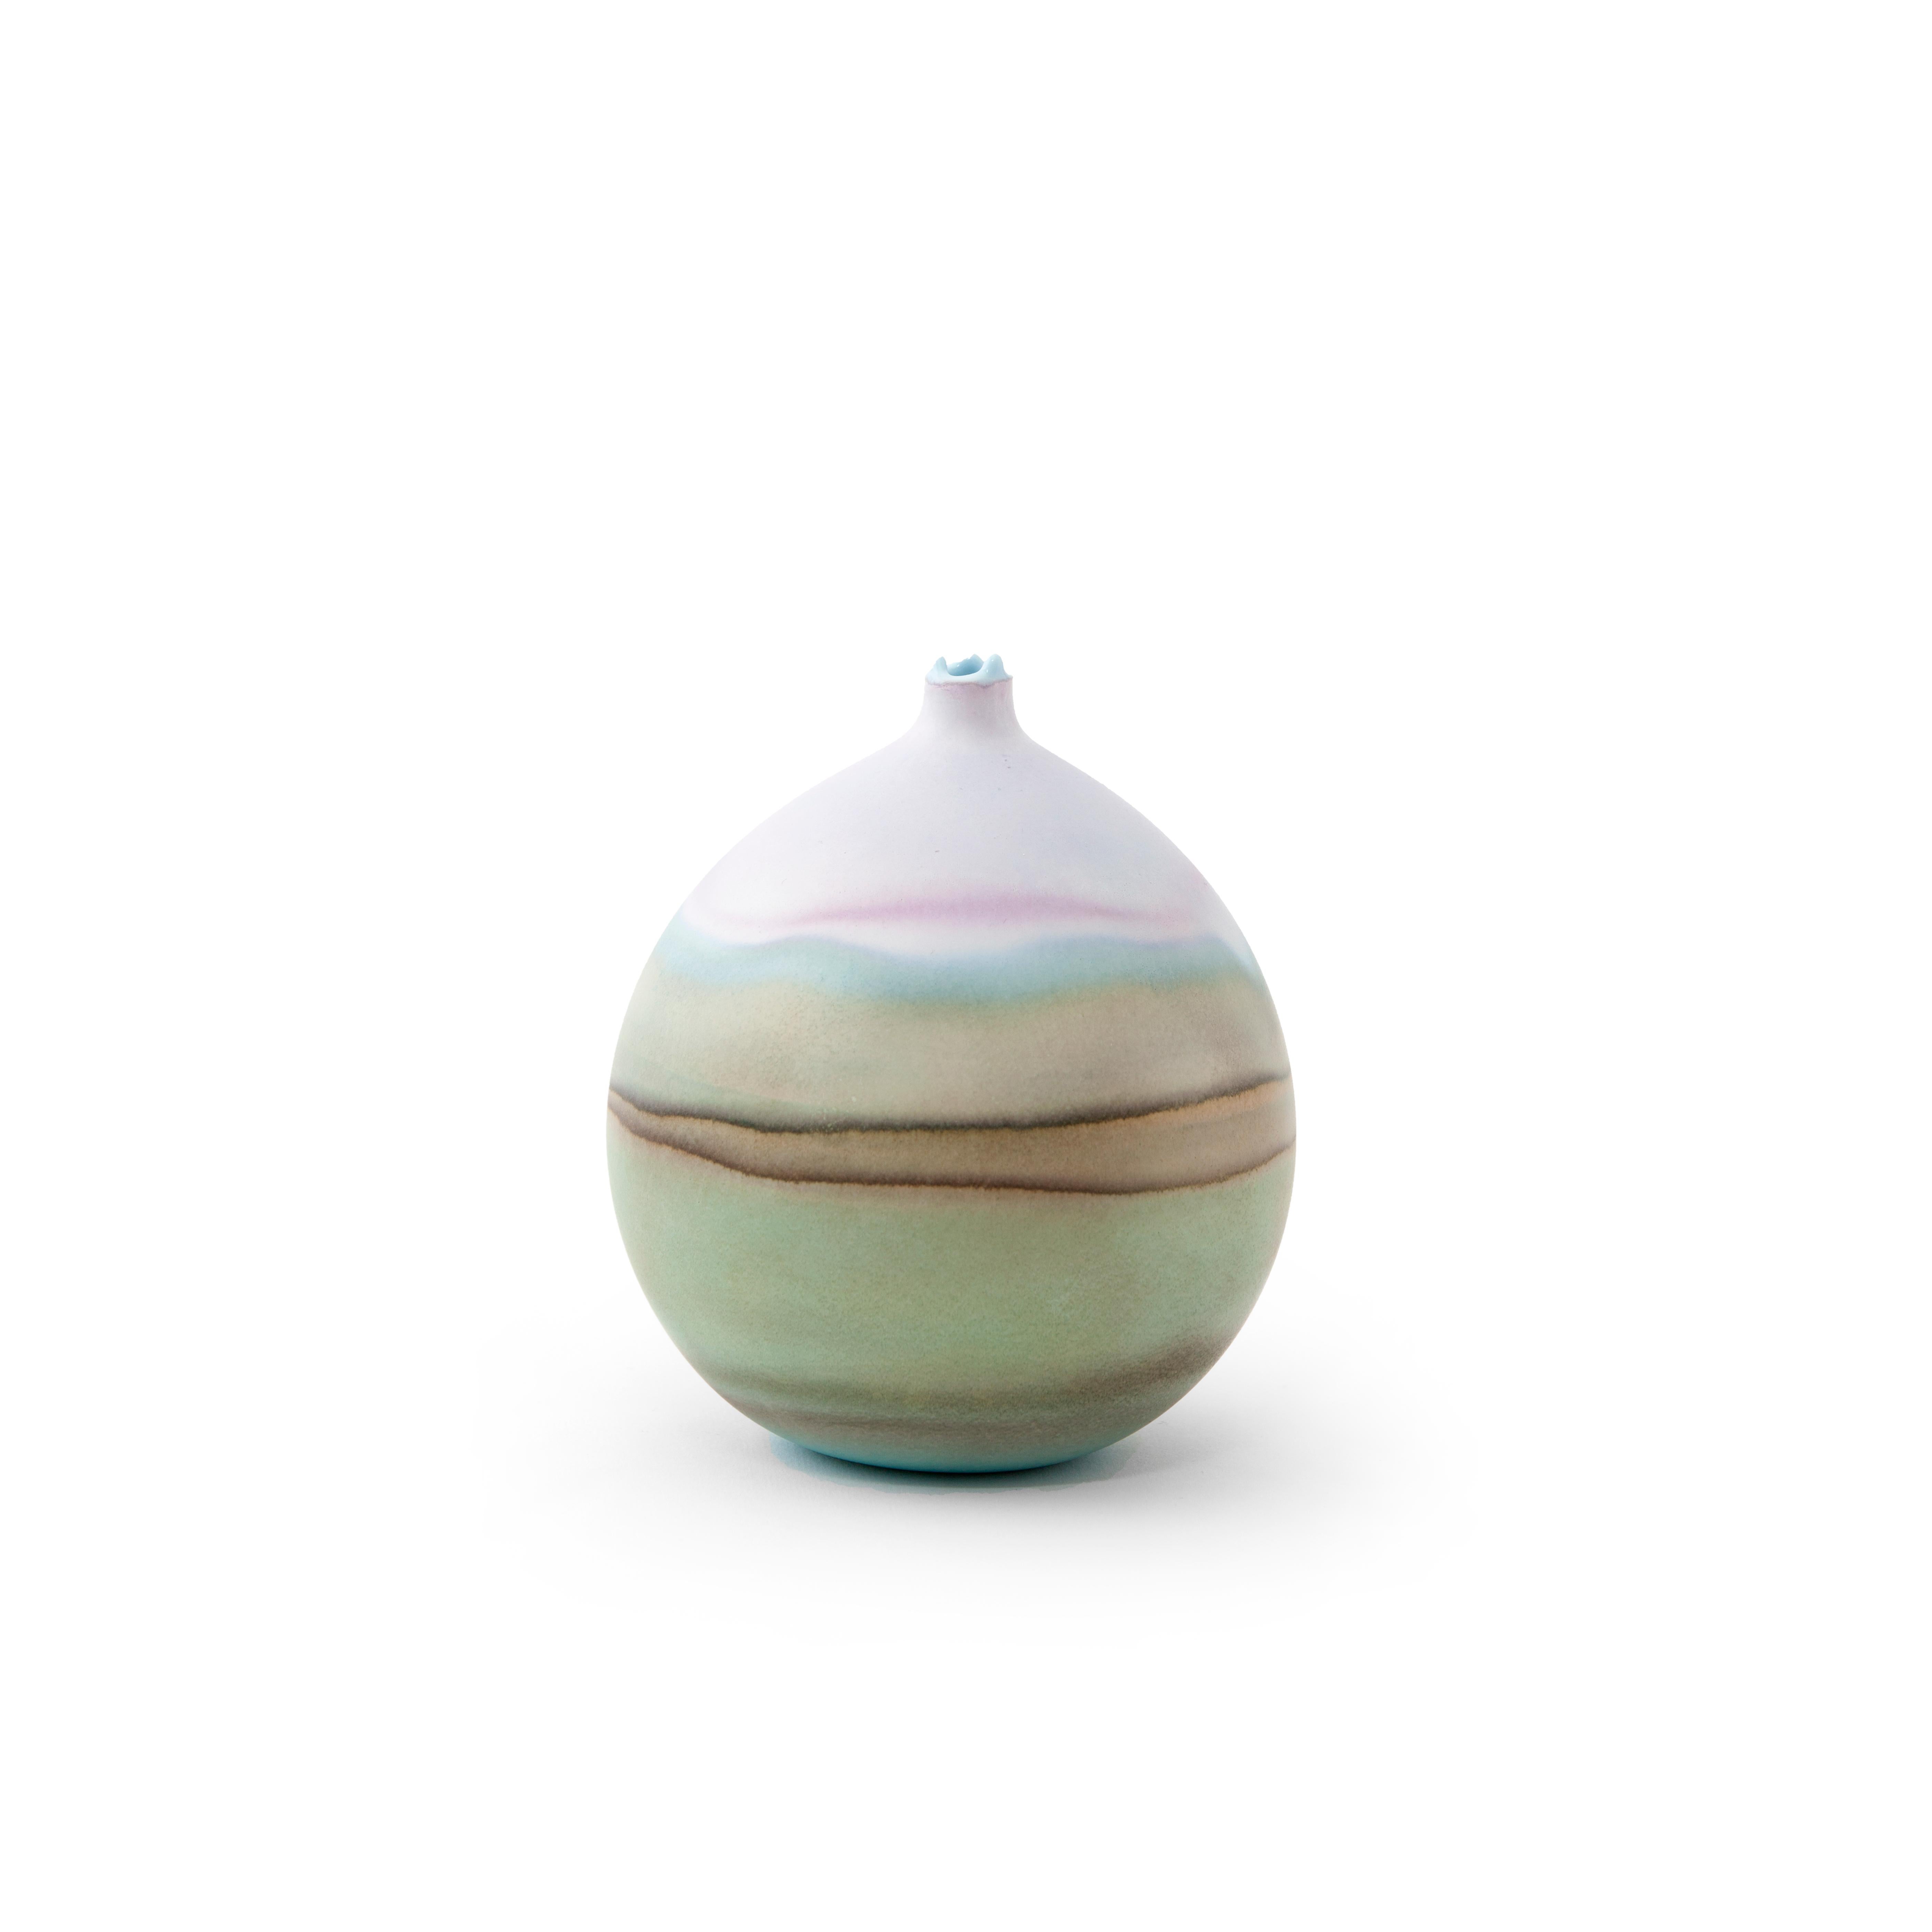 Lilac and Sage Pluto Vase by Elyse Graham
Dimensions: W 13 x D 13 x H 14 cm
Materials: Plaster, Resin
MOLDED, DYED, AND FINISHED BY HAND IN LA. CUSTOMIZATION
AVAILABLE.
ALL PIECES ARE MADE TO ORDER

This collection of vessels is inspired by